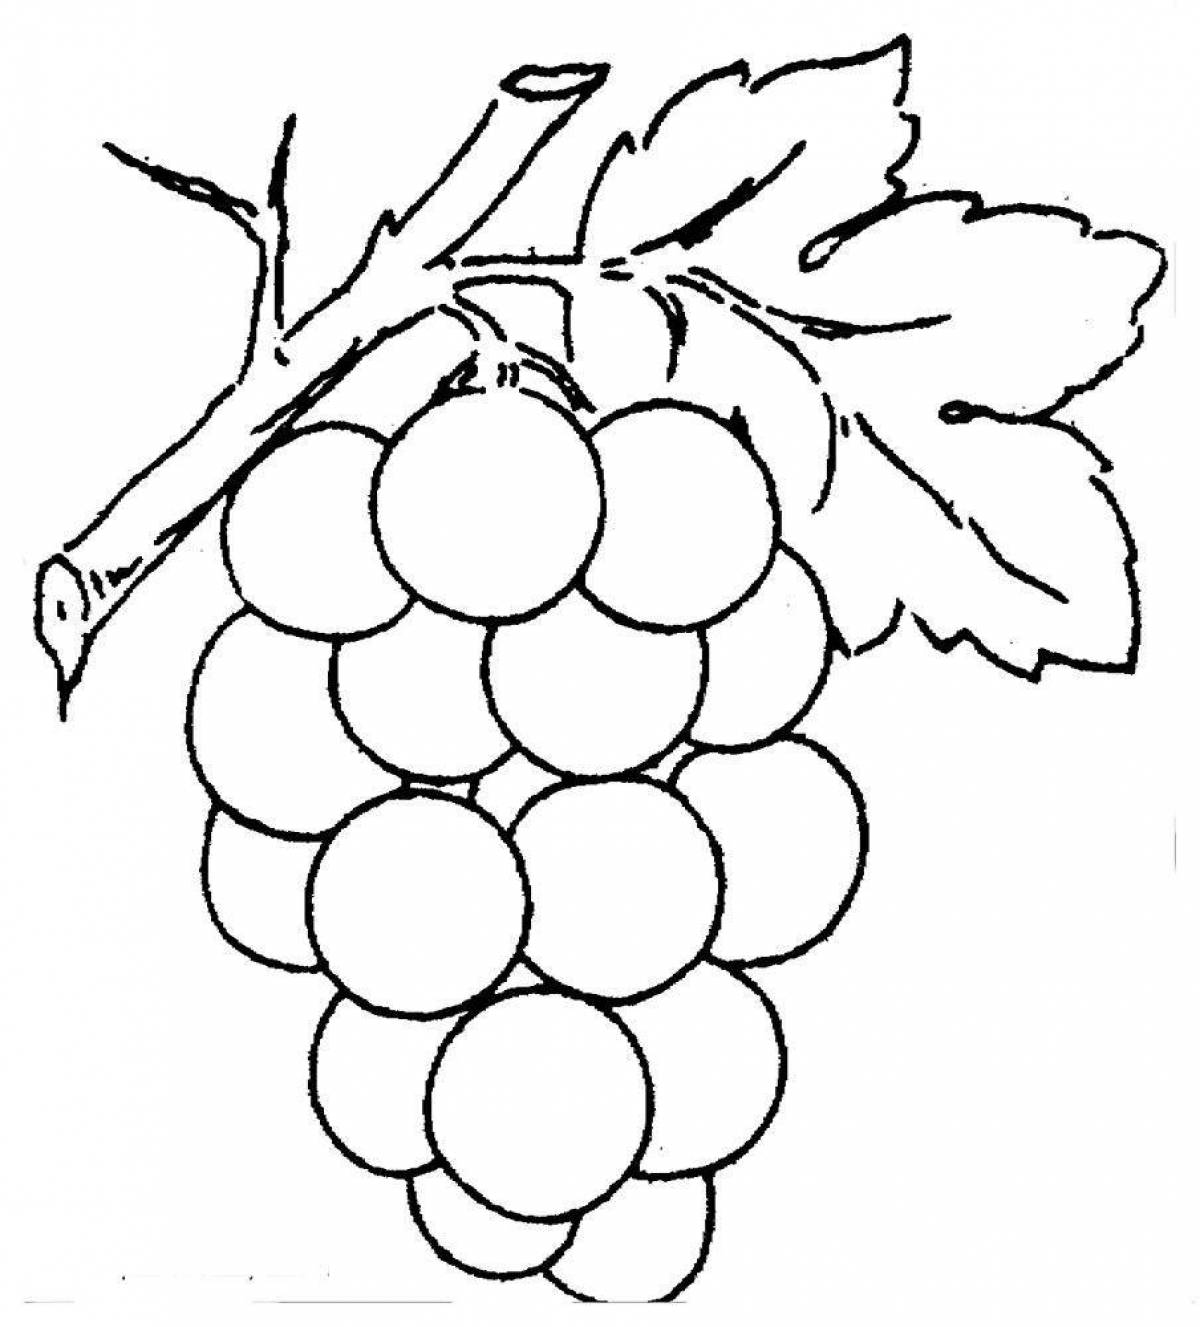 Colorful grape coloring page for kids